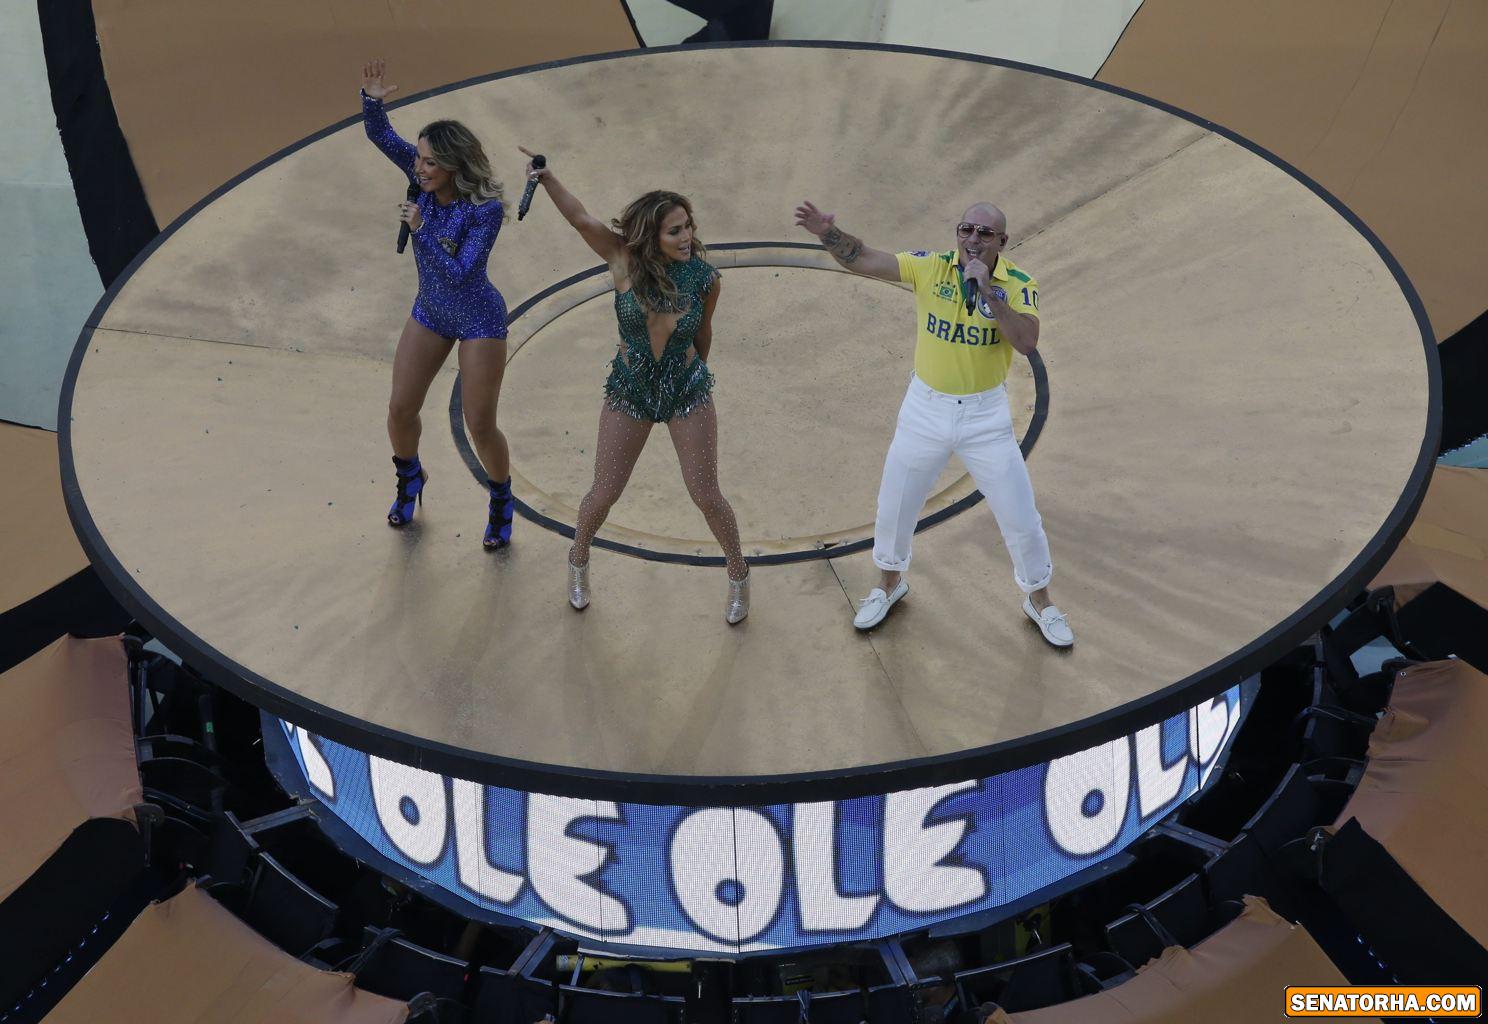 jenifer lopez:J-Lo caught up in 2014 World Cup opening ceremony farce